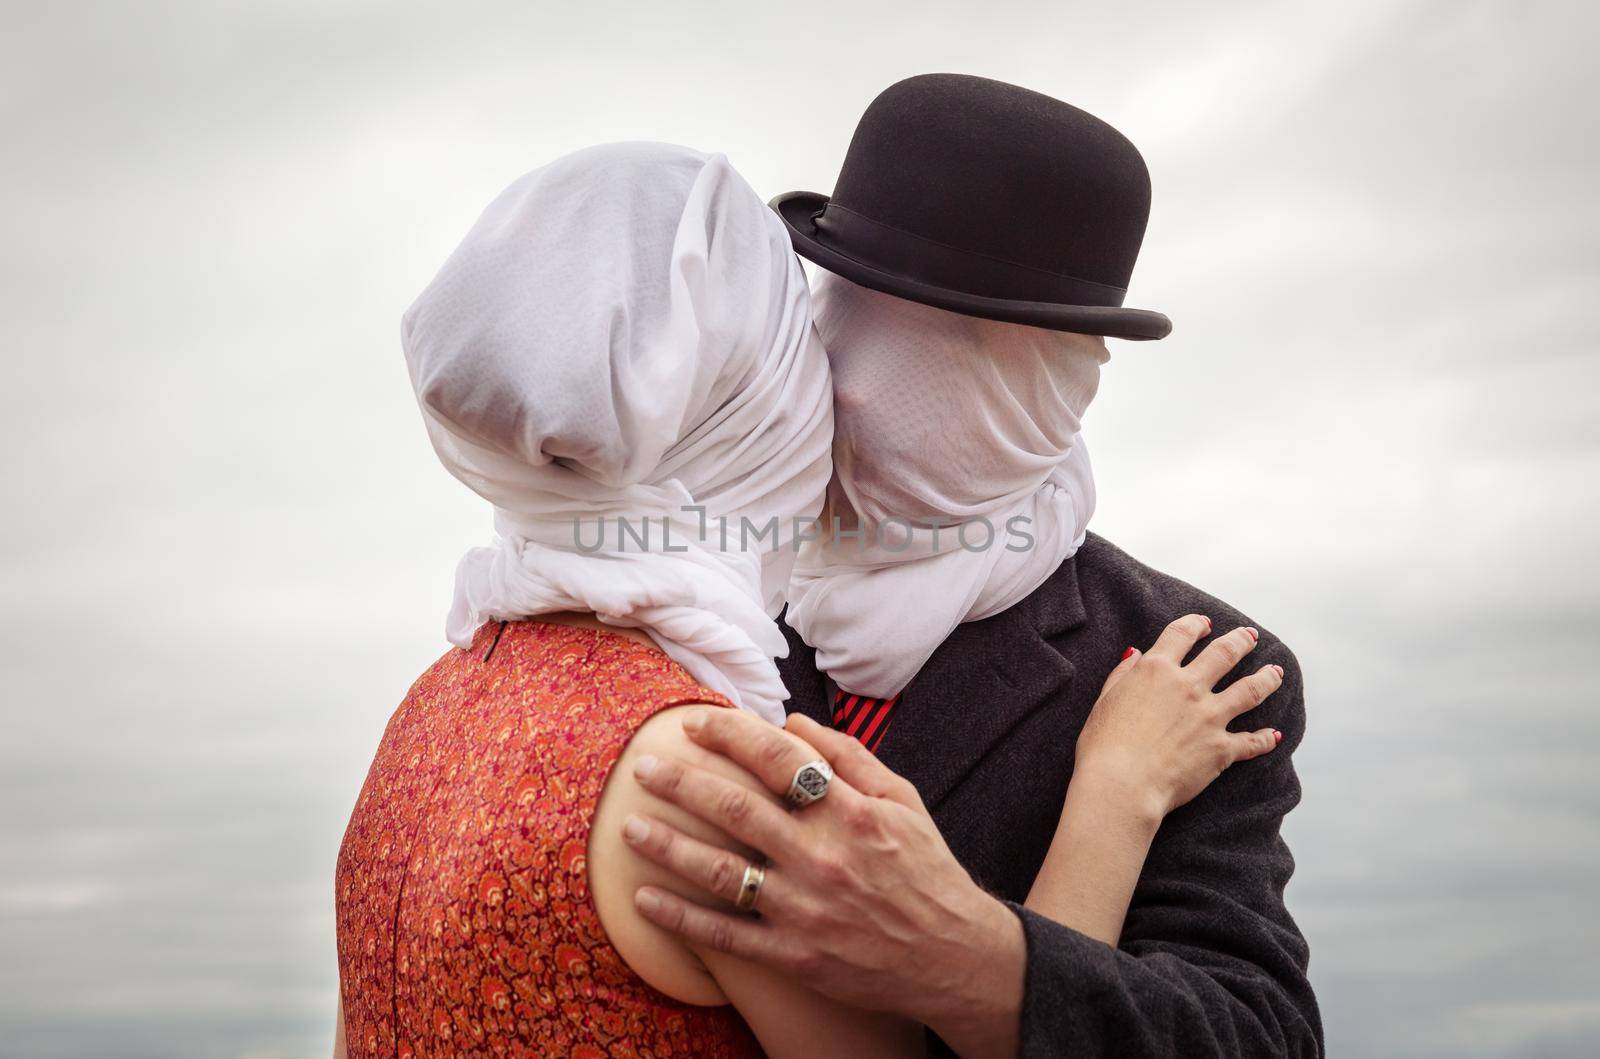 Man kissing woman with white fabrics on their heads by palinchak